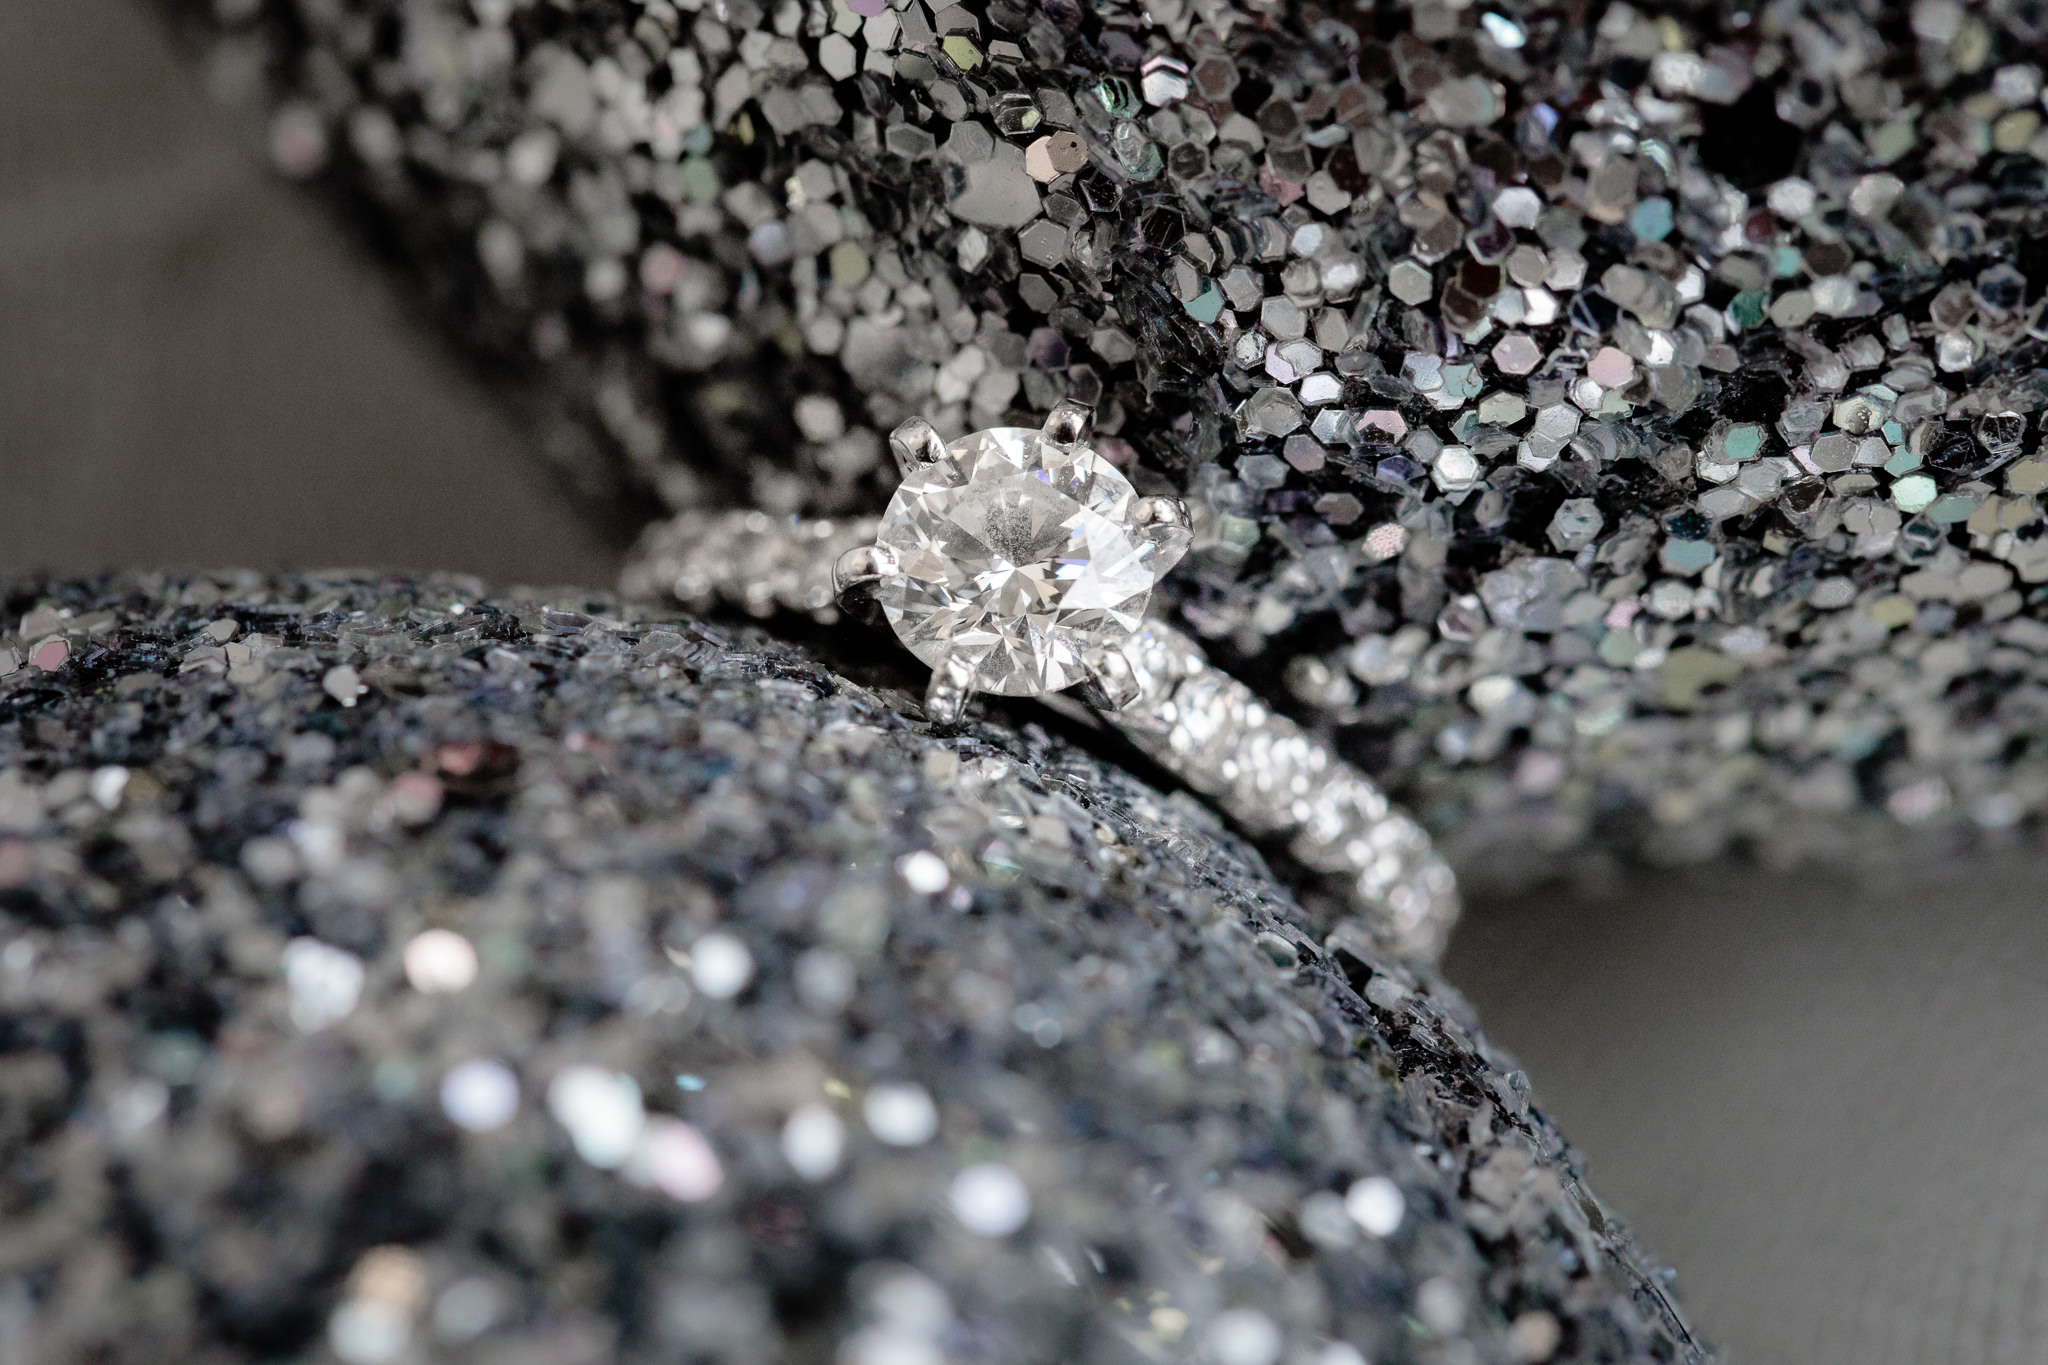 Diamond engagement ring rests between silver glitter shoes